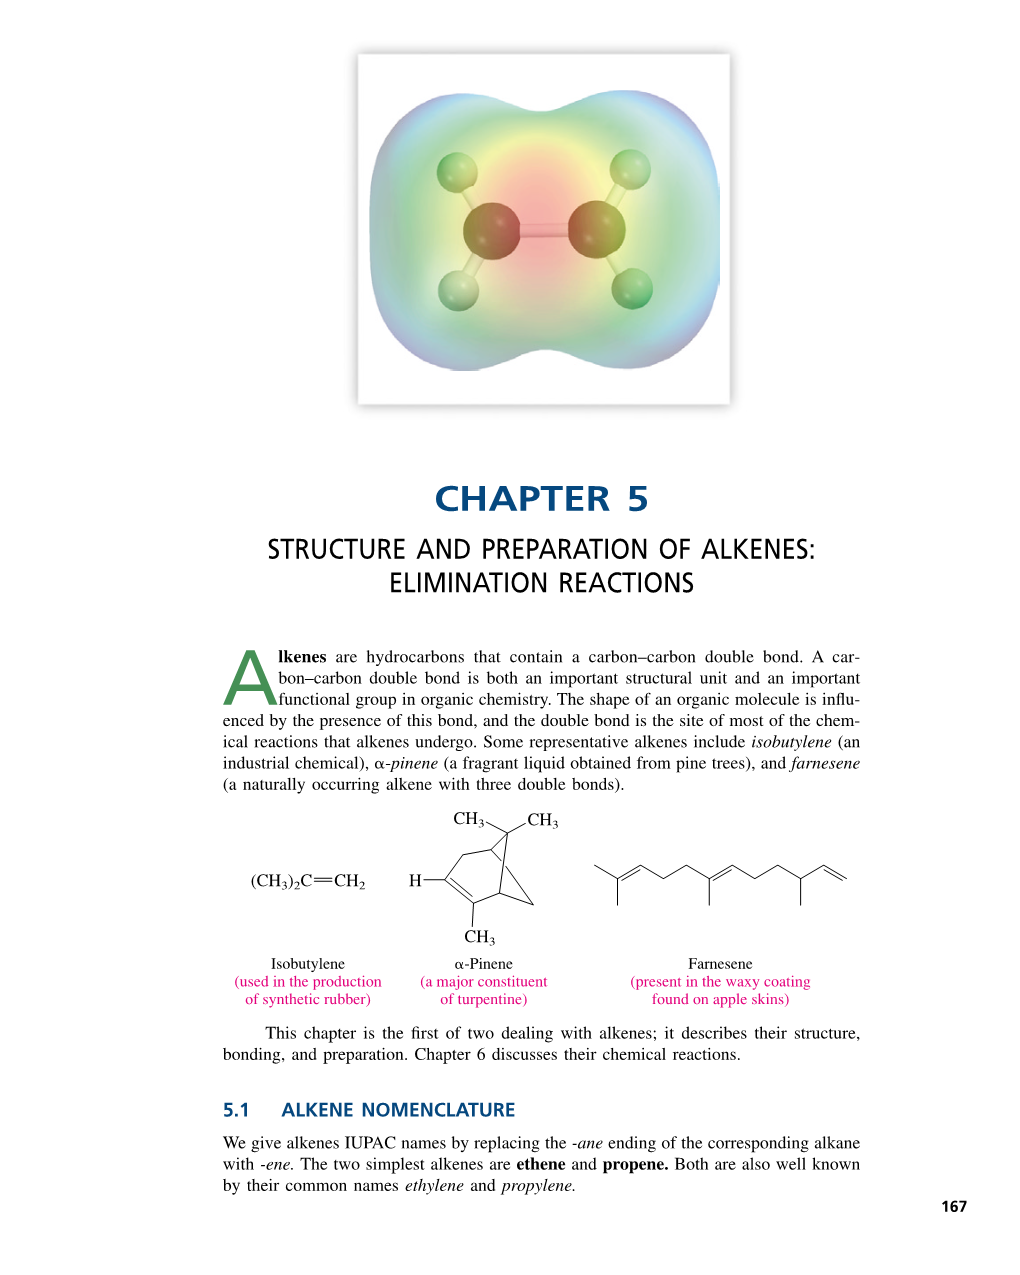 Chapter 5 Structure and Preparation of Alkenes: Elimination Reactions